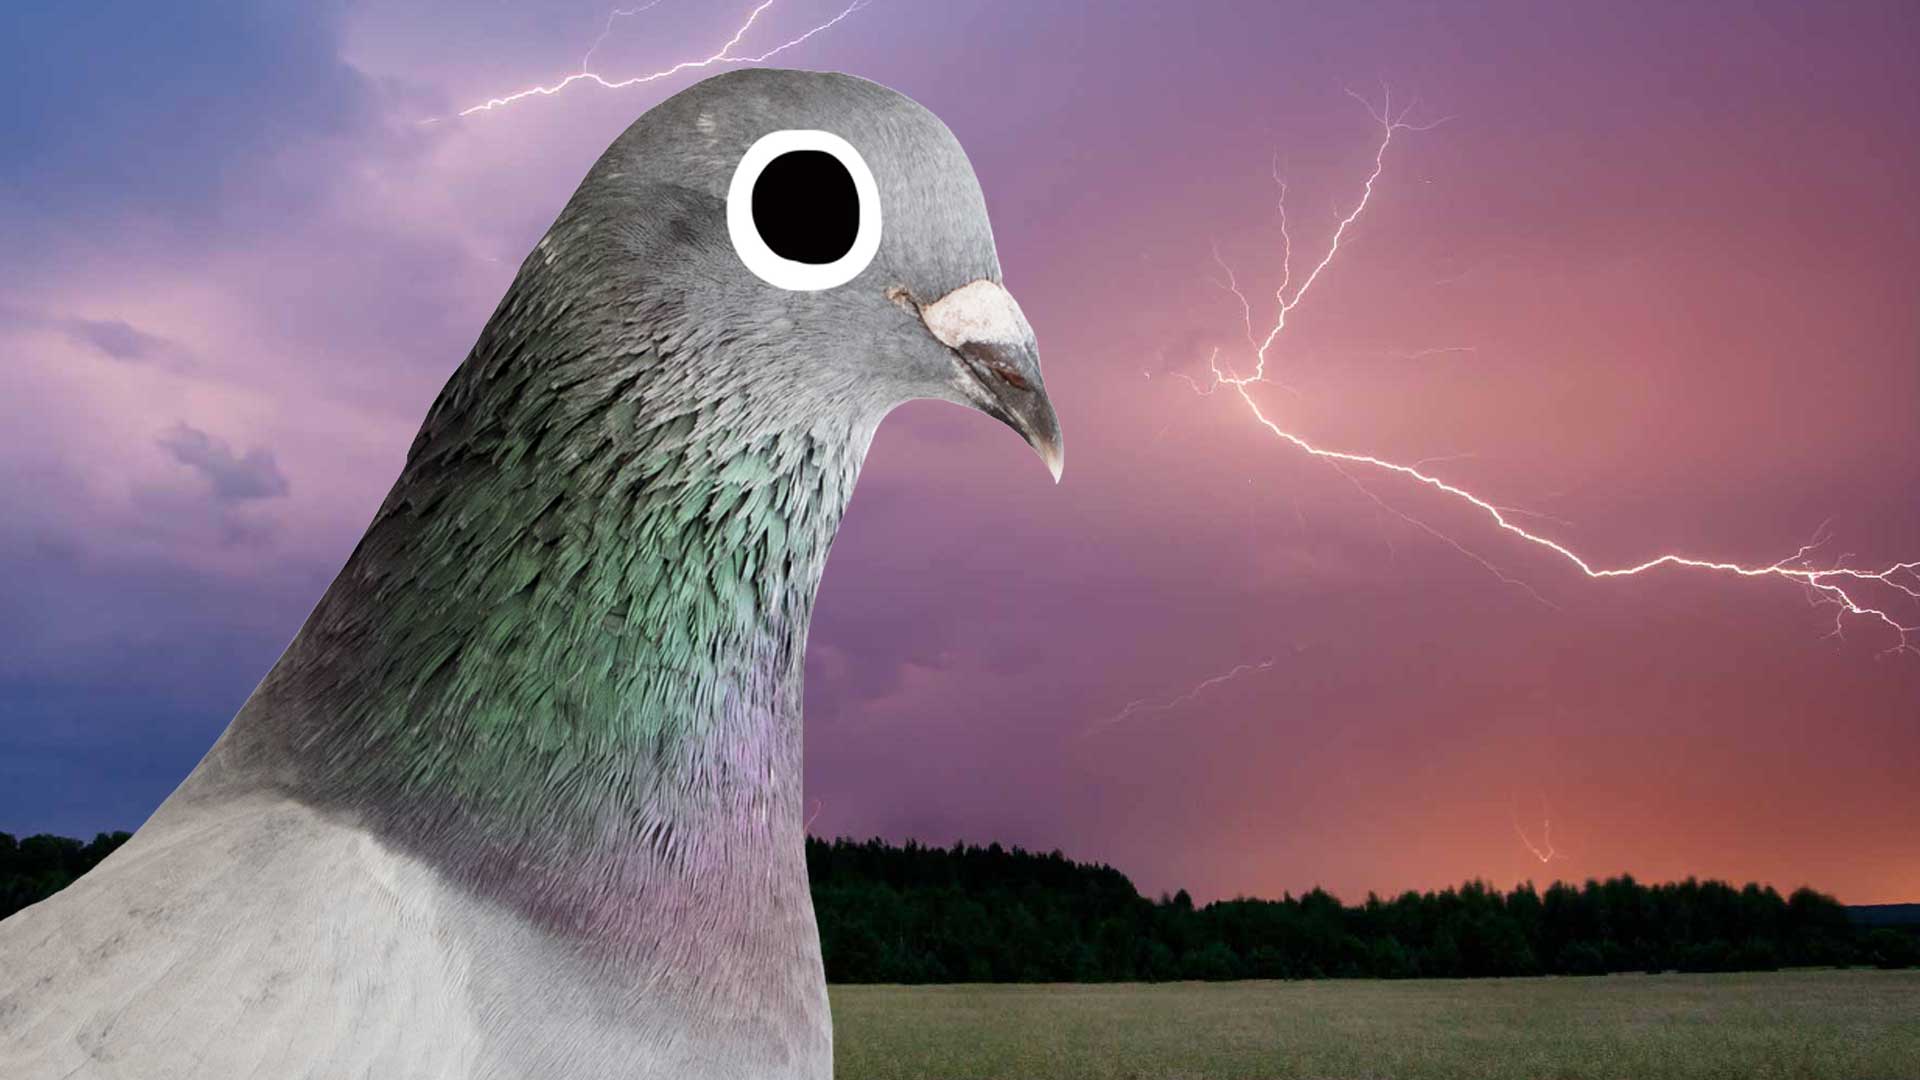 A pigeon in a storm